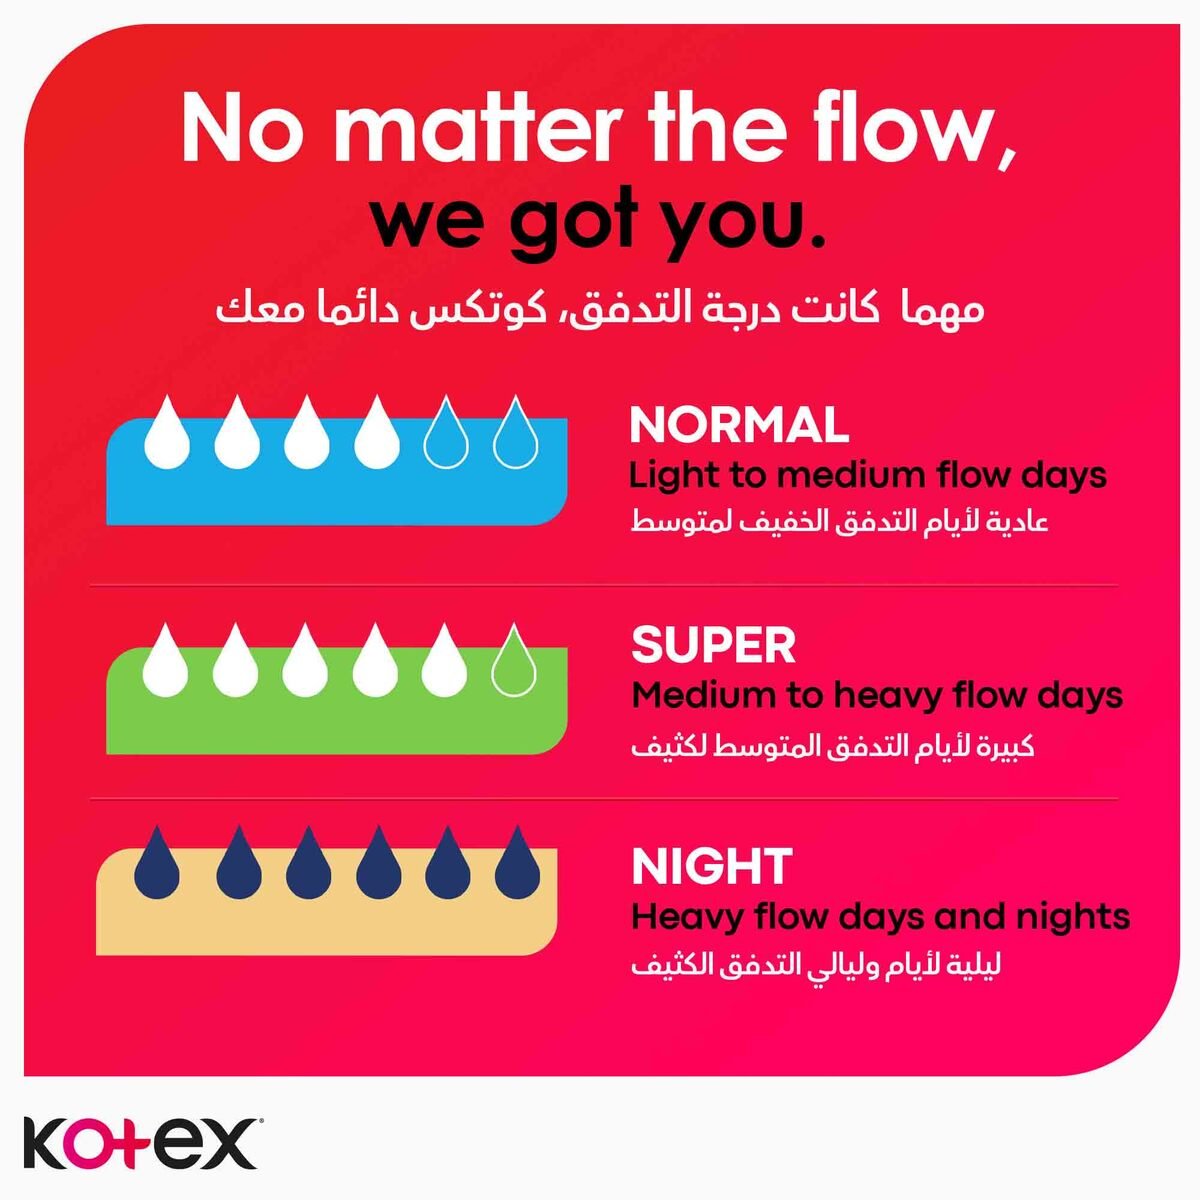 Kotex Maxi Protect Thick Super Size Sanitary Pads with Wings 10pcs